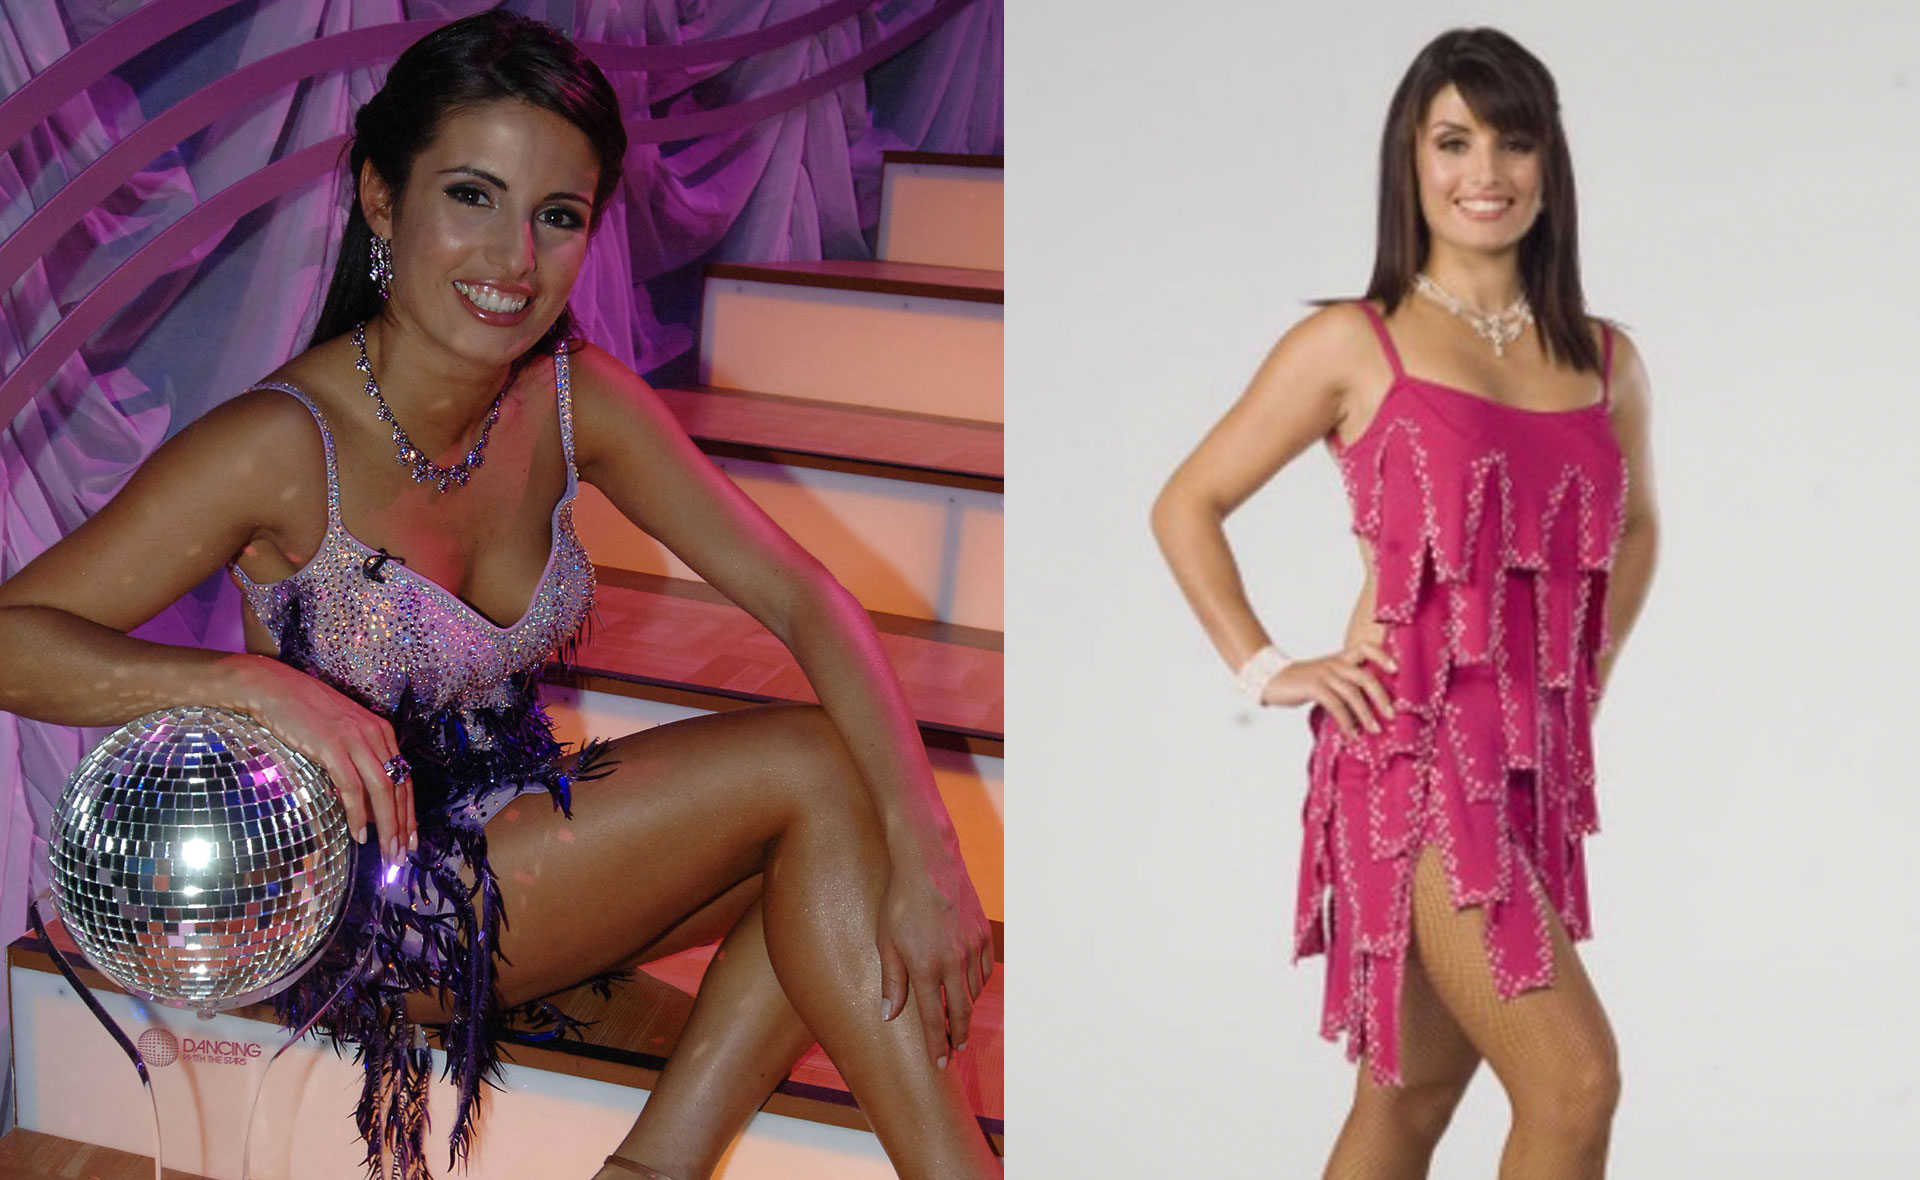 Twinkle toes returns! Ada Nicodemou confirmed as the first name on the Dancing With The Stars: All Stars edition